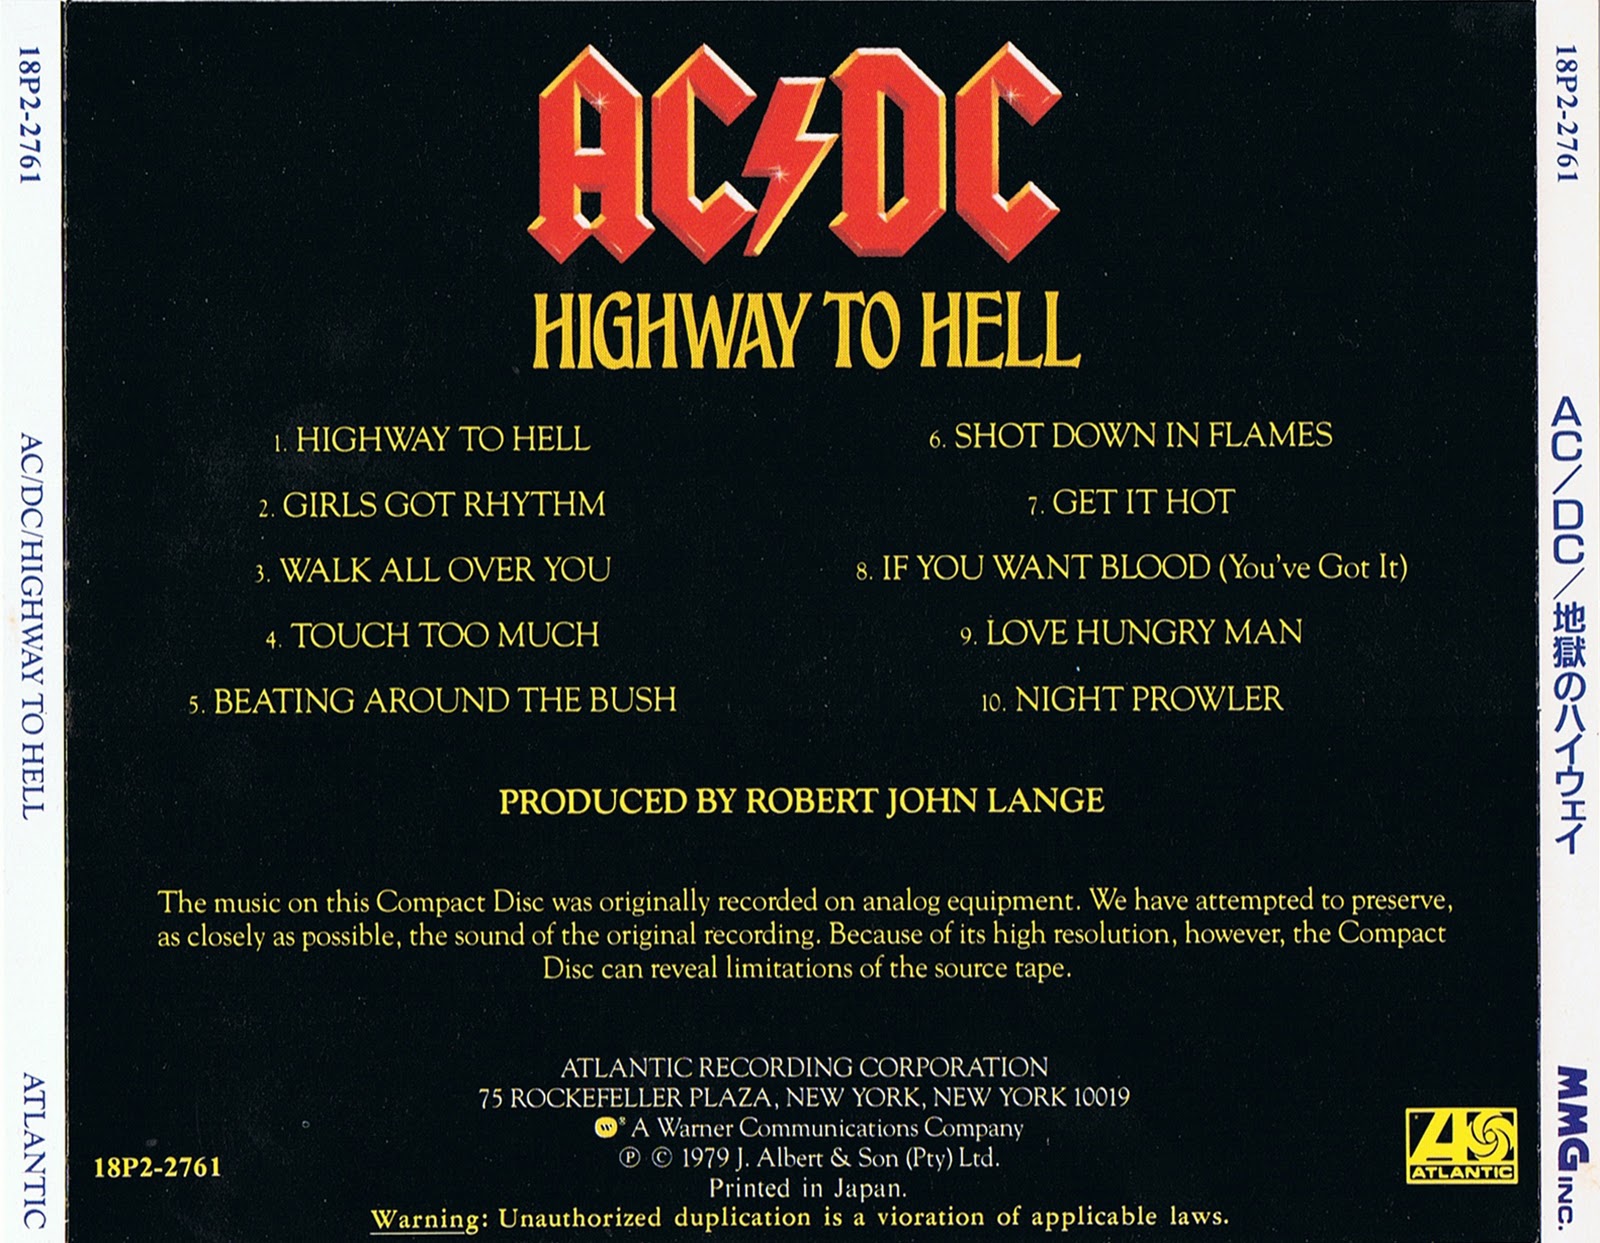 Acdc highway to hell. AC DC Highway to Hell альбом. AC DC 1979 альбом. AC DC Highway to Hell обложка альбома. 1979 - Highway to Hell.